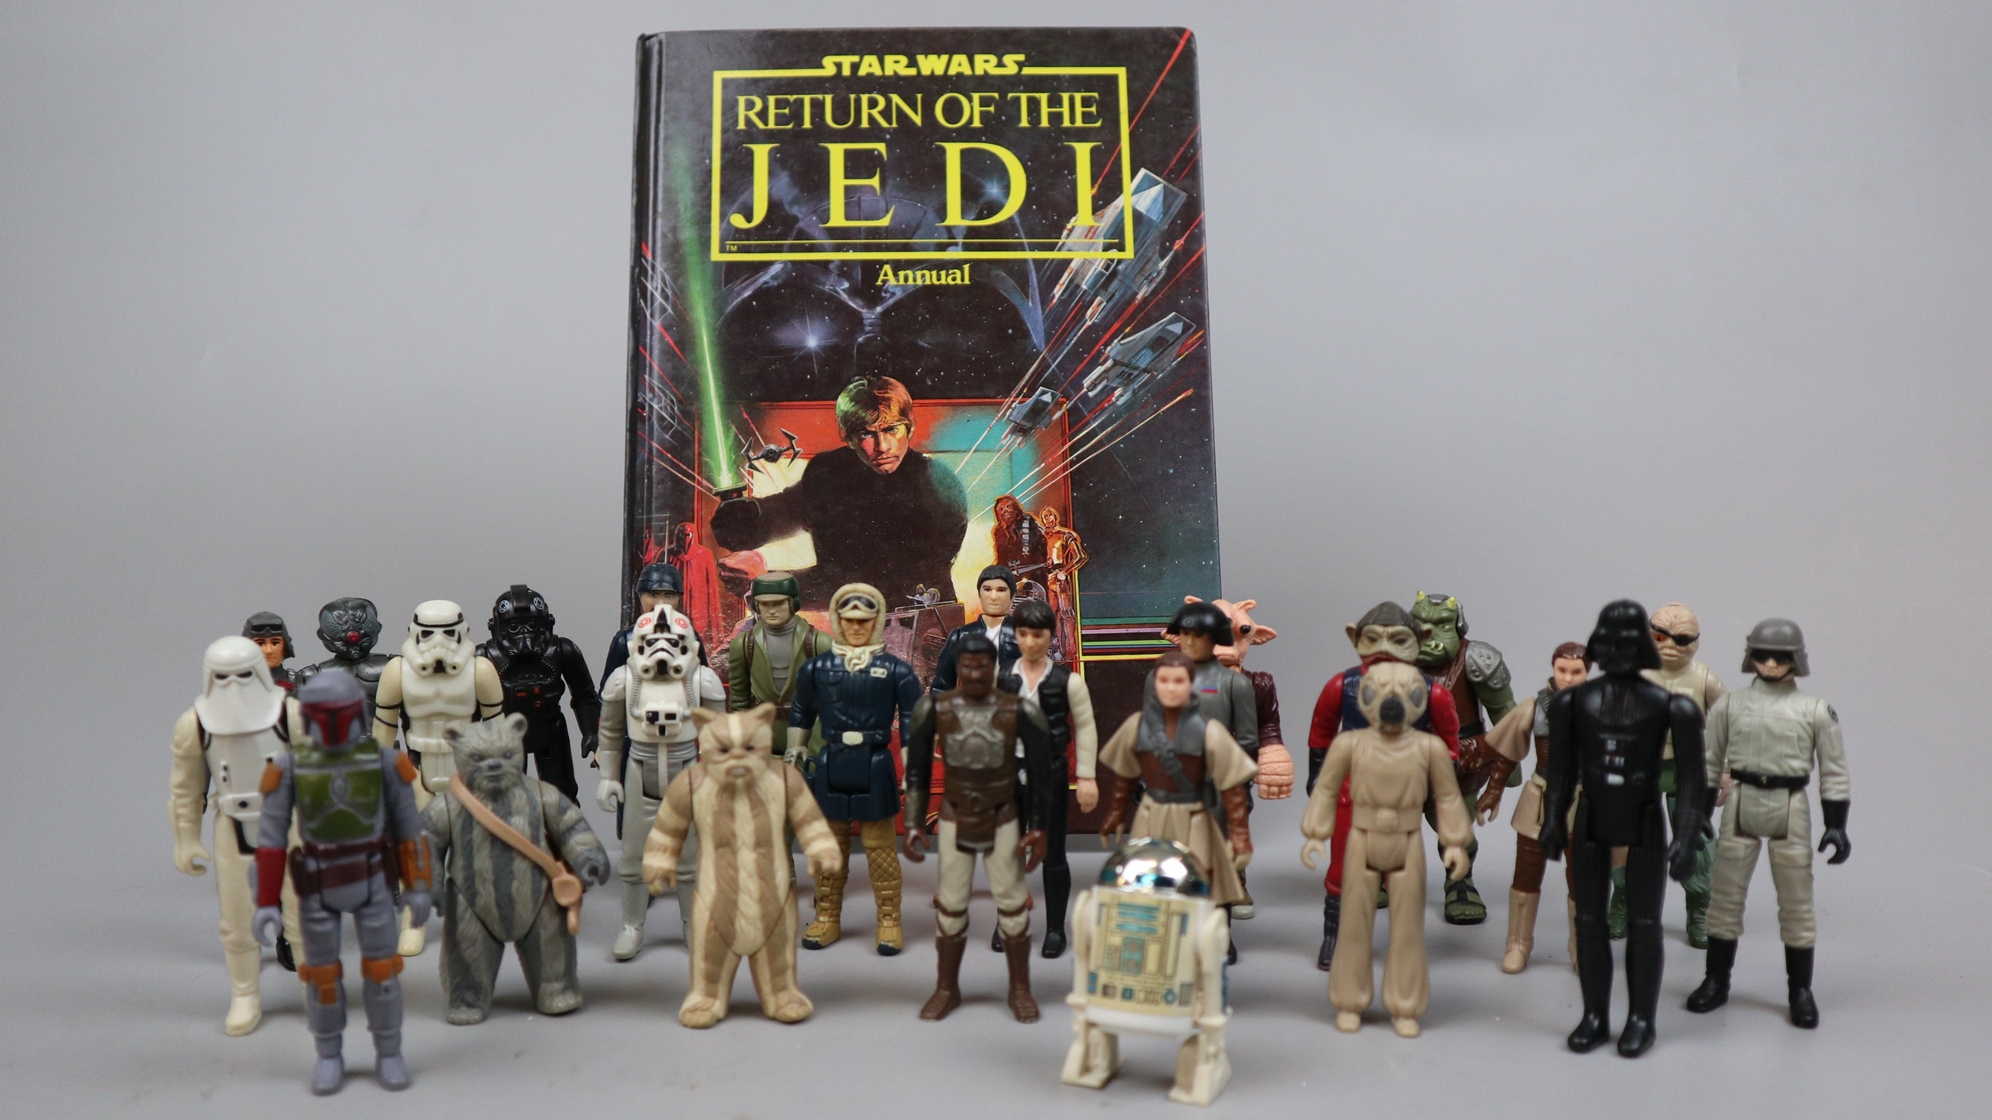 Collection of original 1970's star wars figures to include Boba Fett, Darth Vader & Annual etc - Image 2 of 3